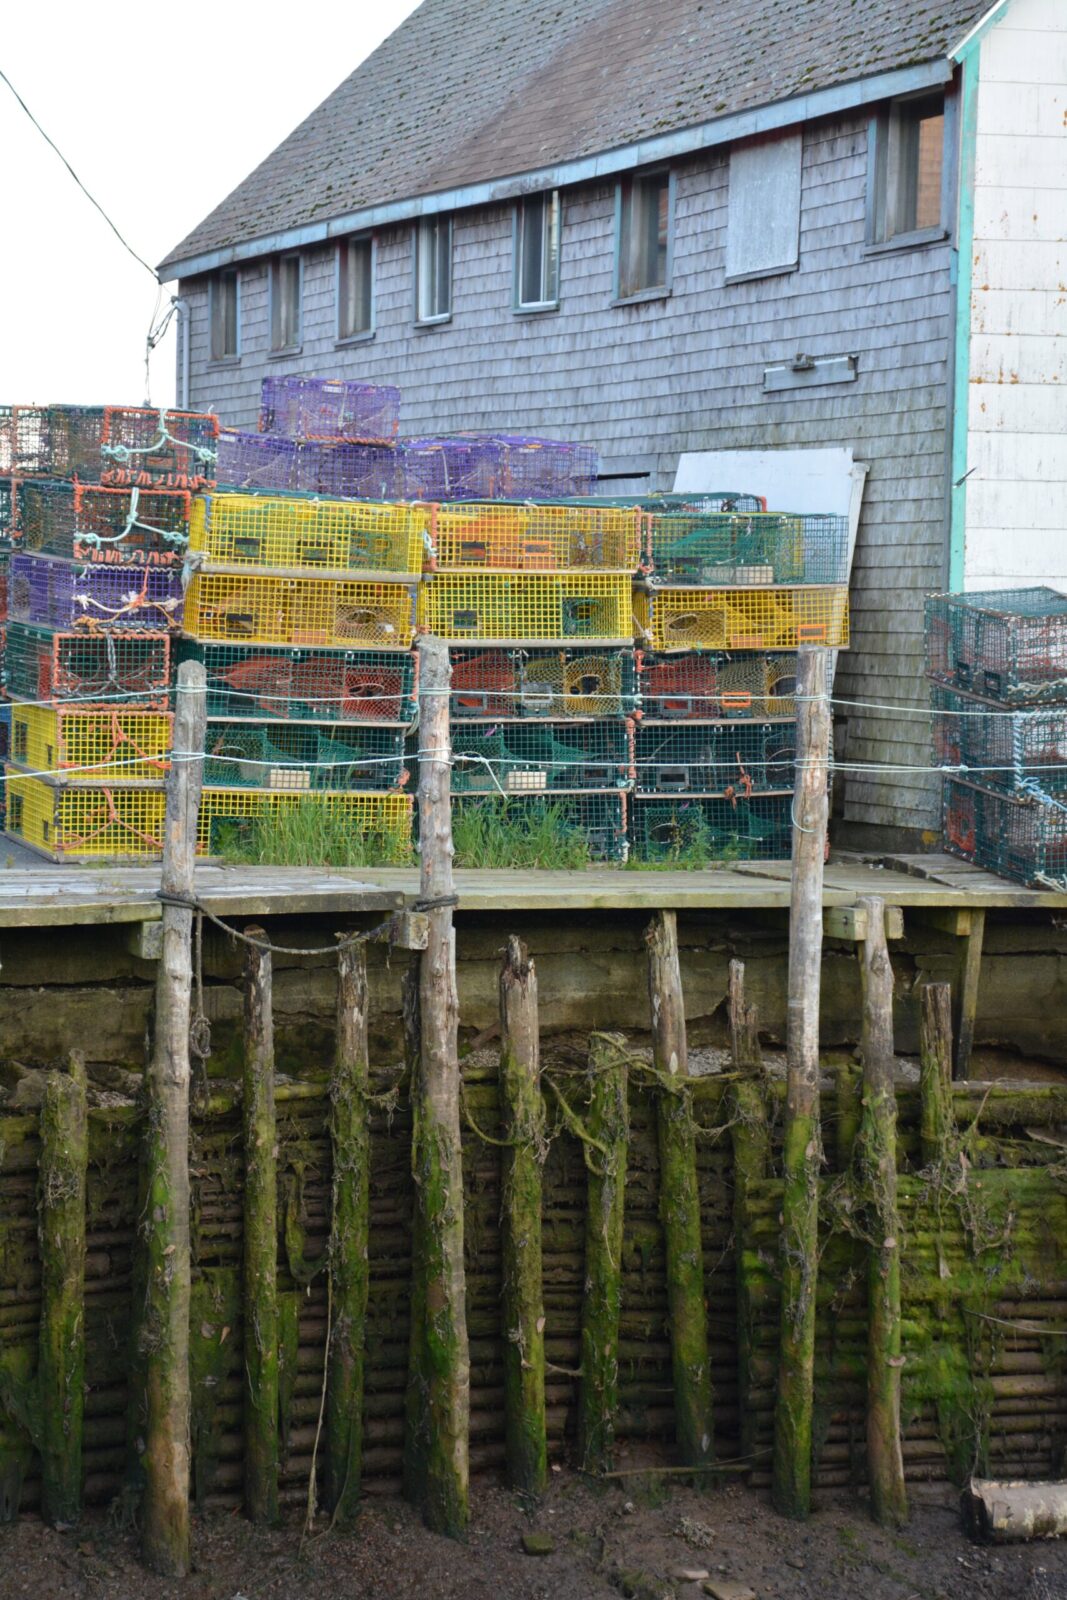 Crates of lobsters on a dock.